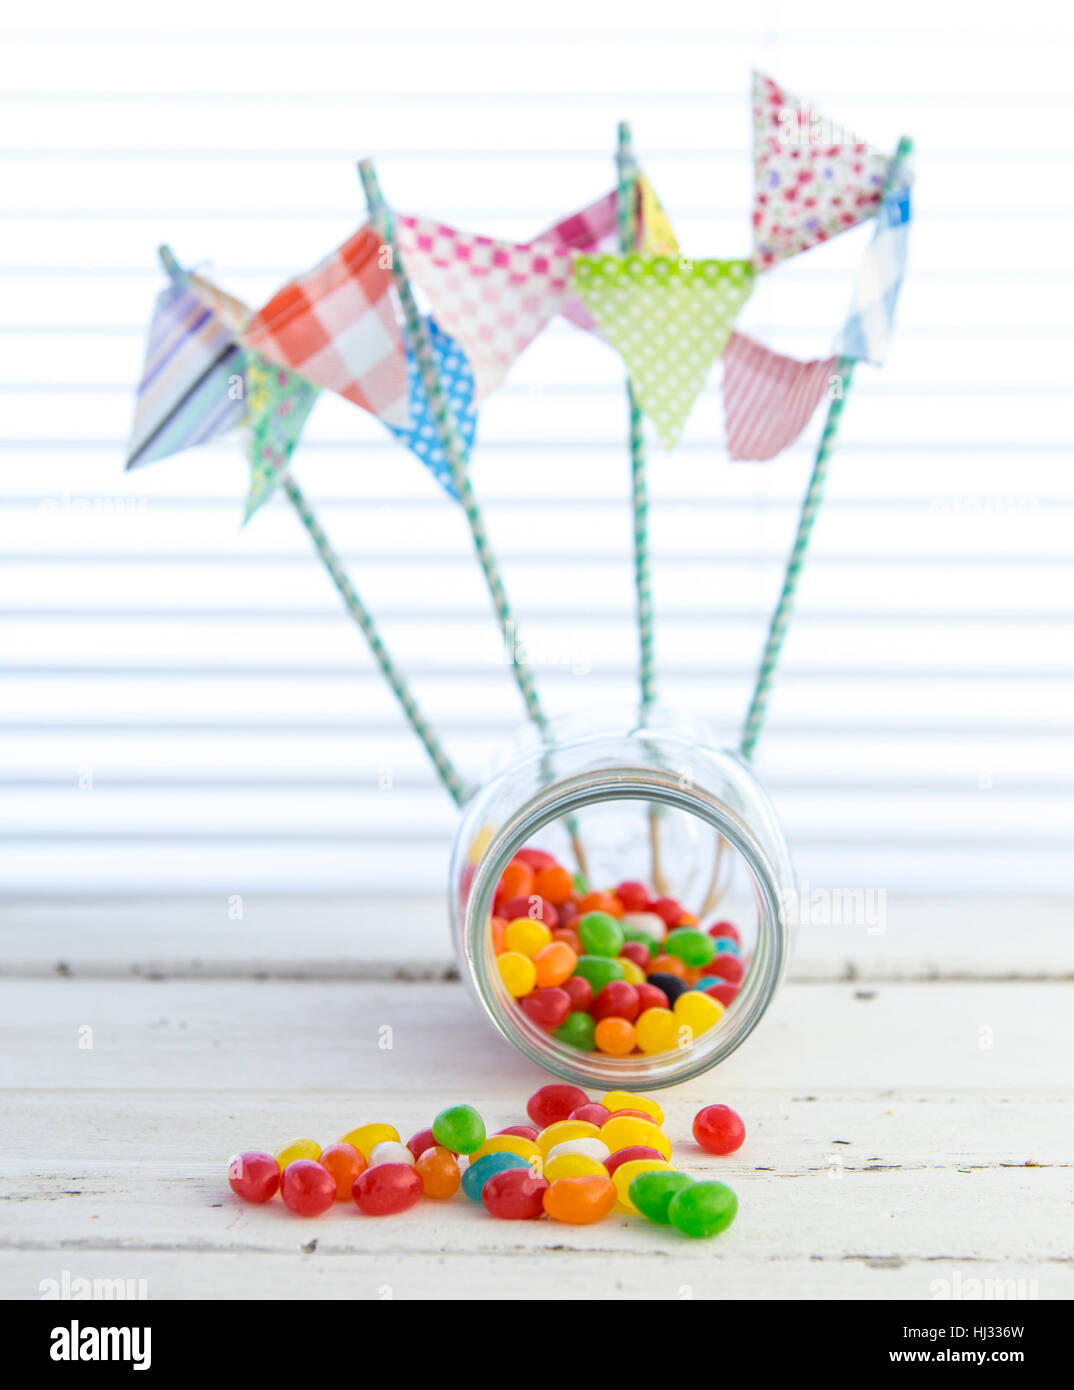 Colorful jellybeans spilling from a Jar with white rustic background Stock Photo